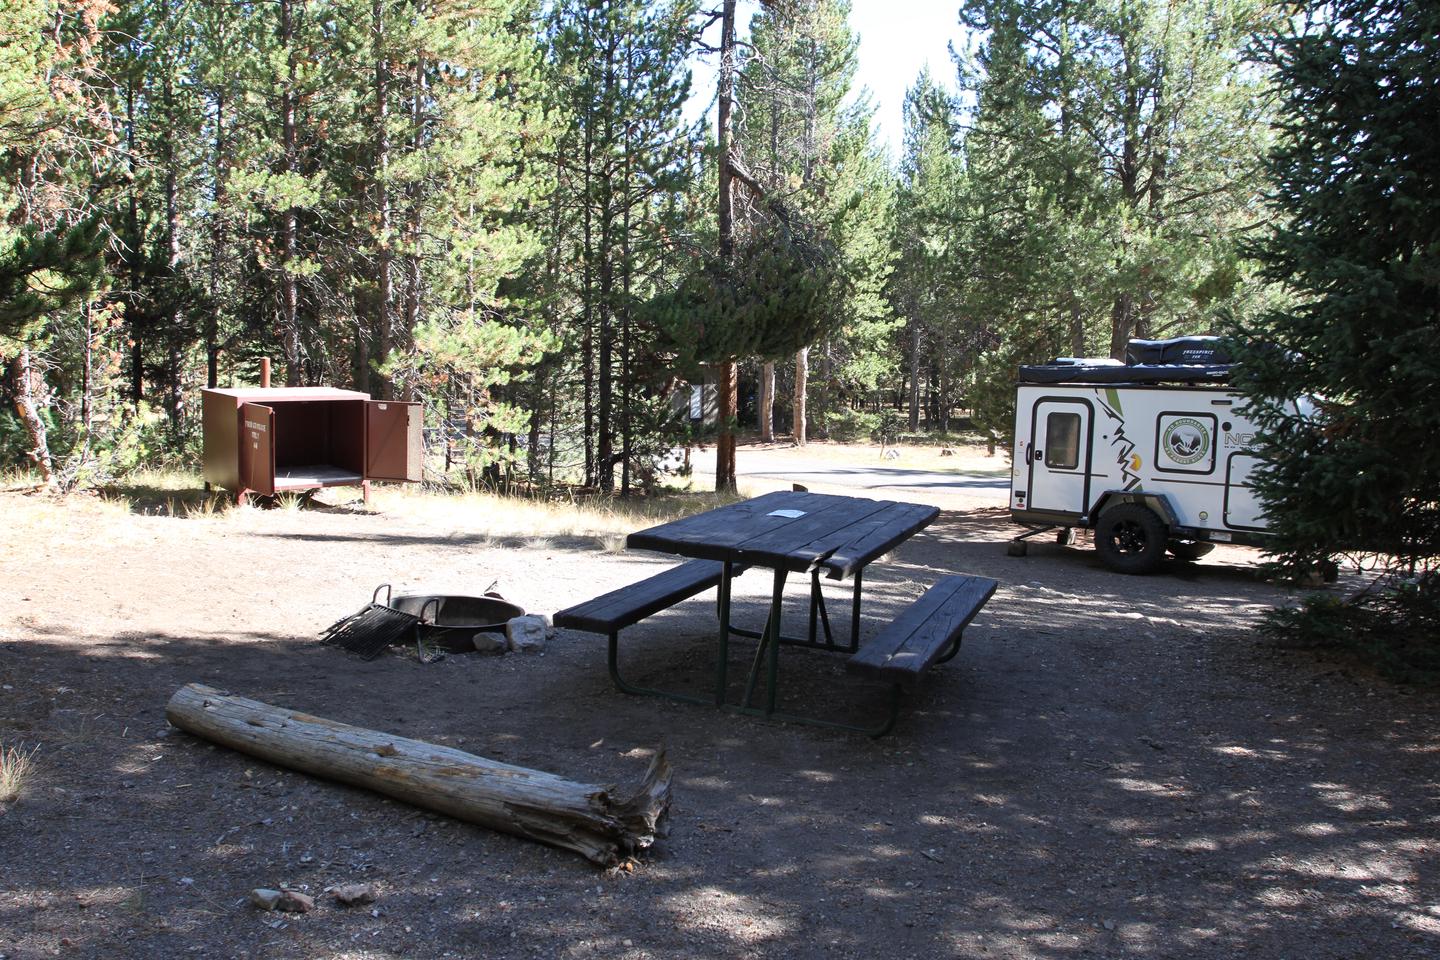 Indian Creek Campground site #44.Indian Creek Campground site #44